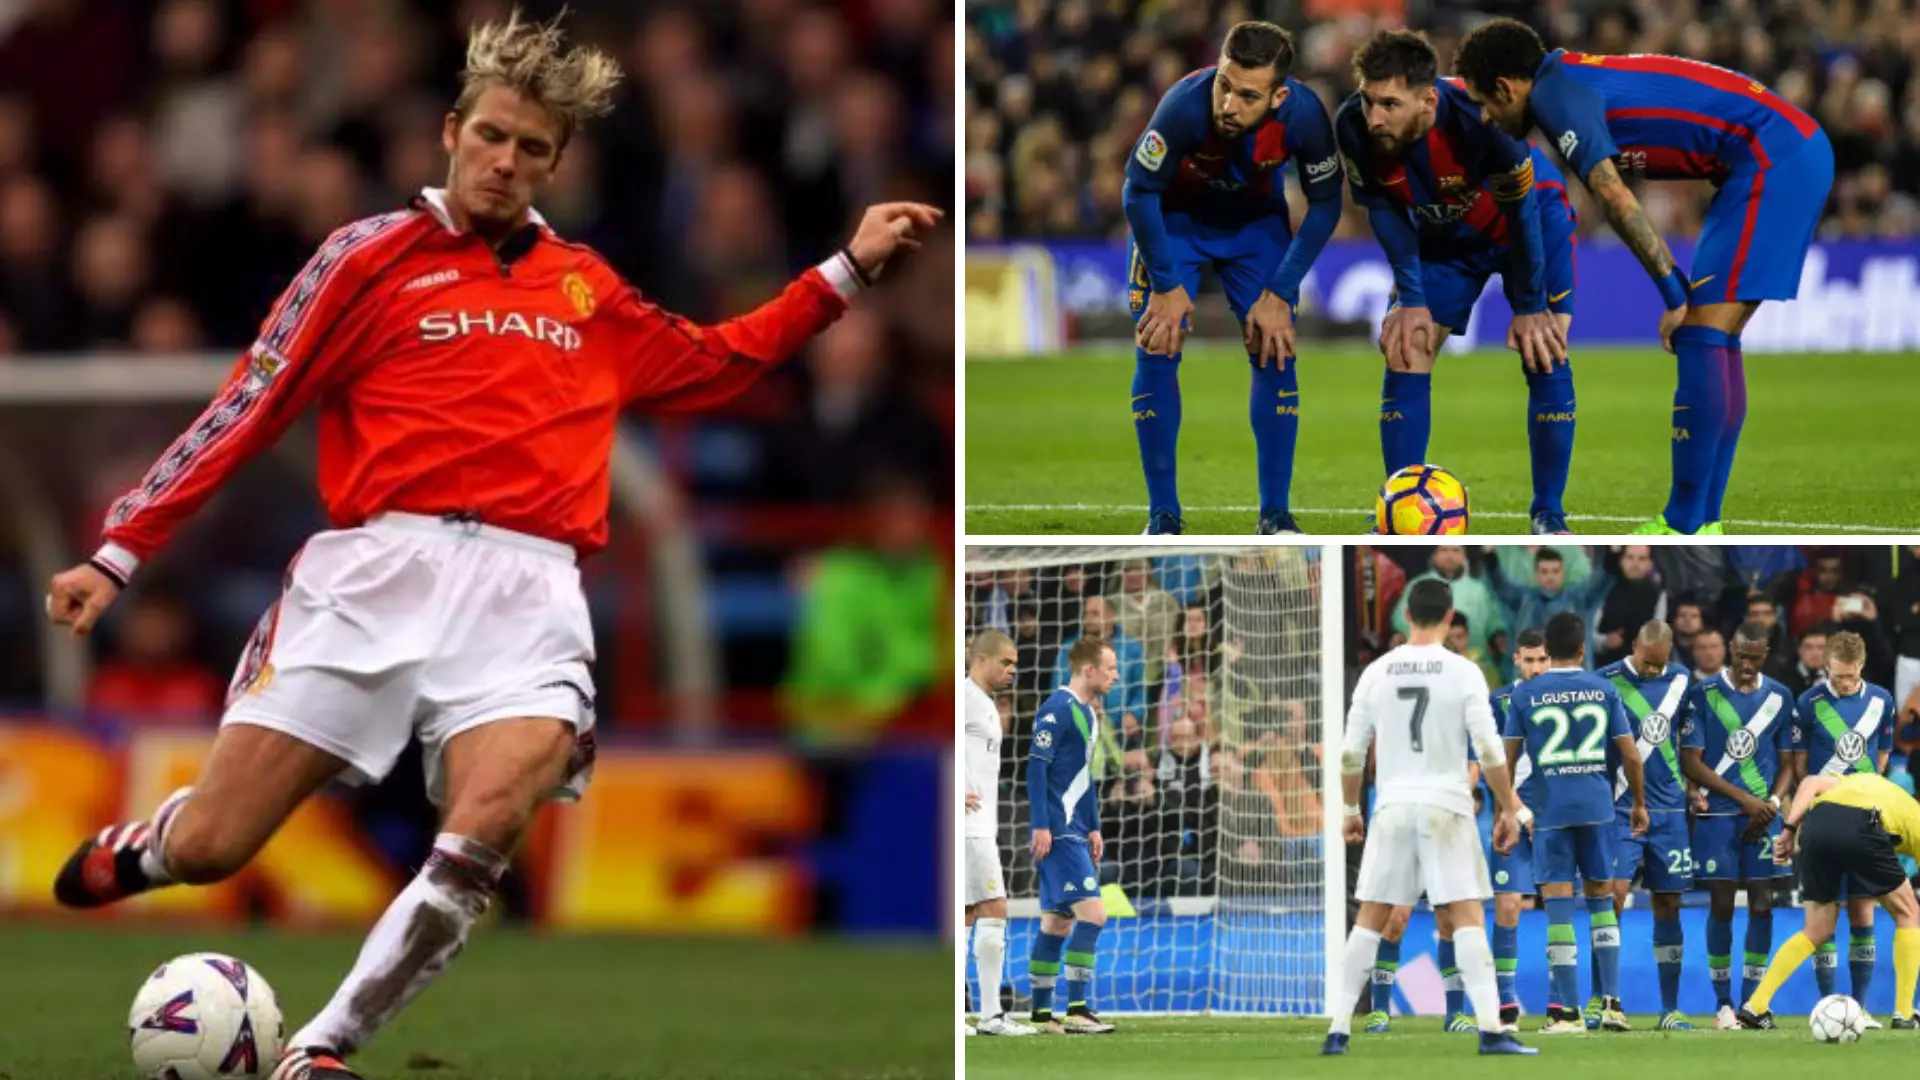 The 30 Greatest Free-Kick Takers Of All Time Have Been Named And Ranked By Fans